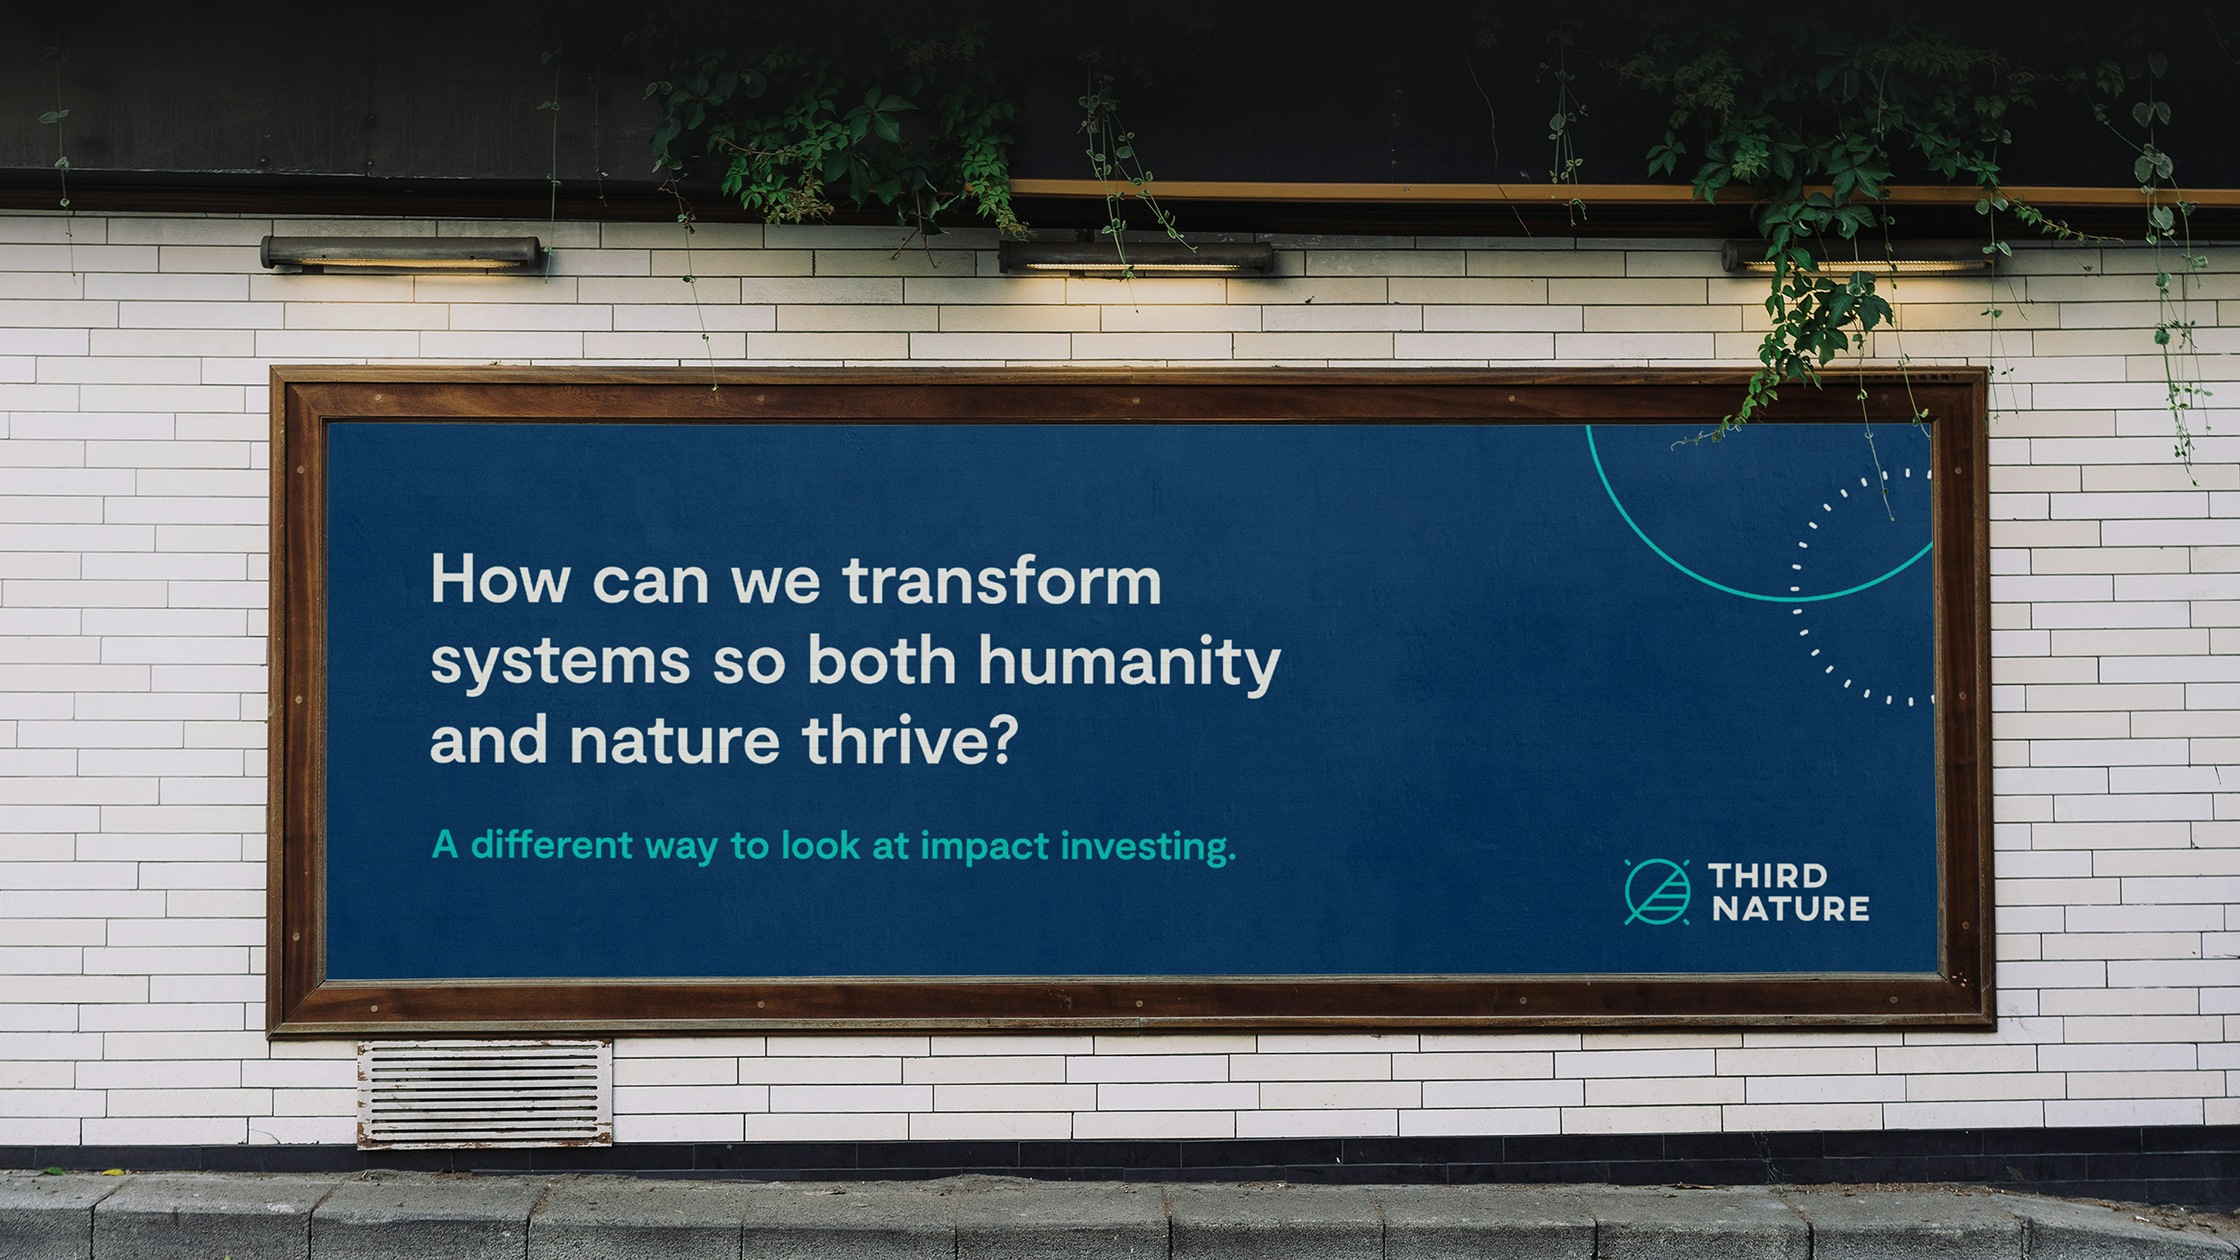 A billboard on a white tiled wall with green vines surrounding that reads "How can we transform systems so both humanity and nature thrive? A different way to look at impact investing. Third Nature"